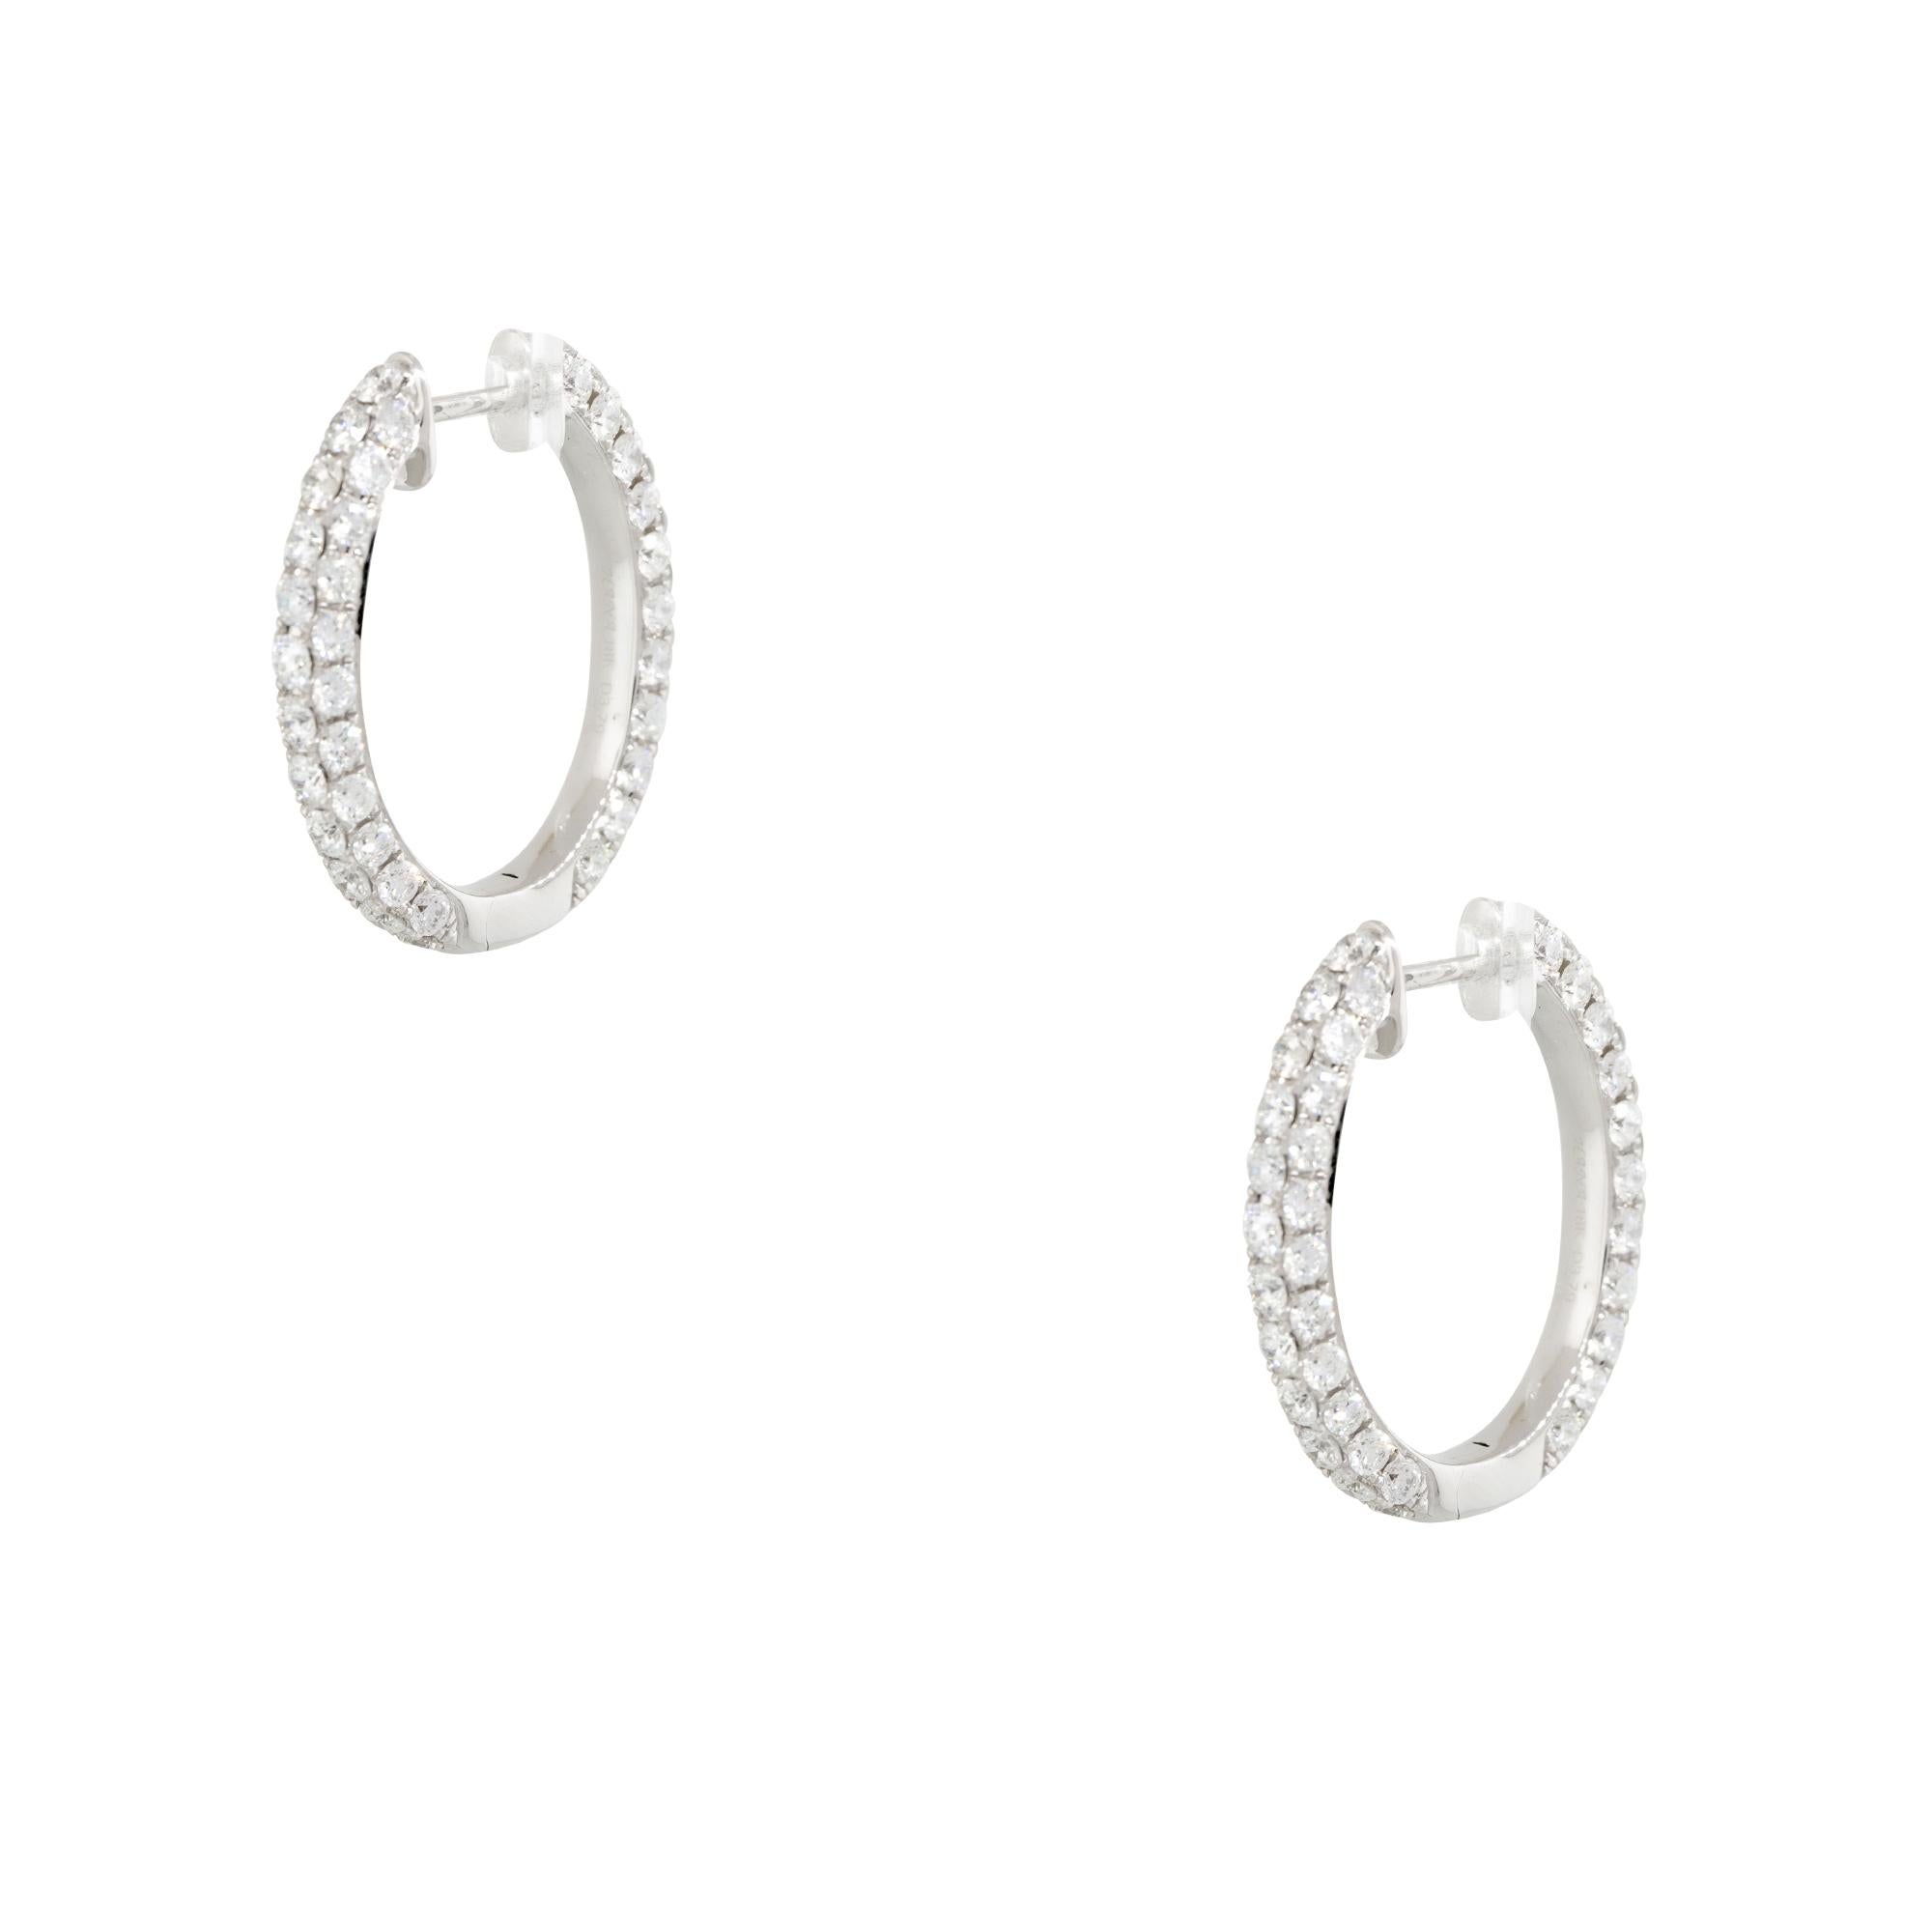 18k White Gold 3.79ctw Round Brilliant Diamond Hoop Earrings
Material: 18k White Gold
Diamond Details: Approximately 3.79ctw of Round Brilliant cut Diamonds. Diamonds are set in rows across 3 sides of the hoop earrings. The diamonds are not set